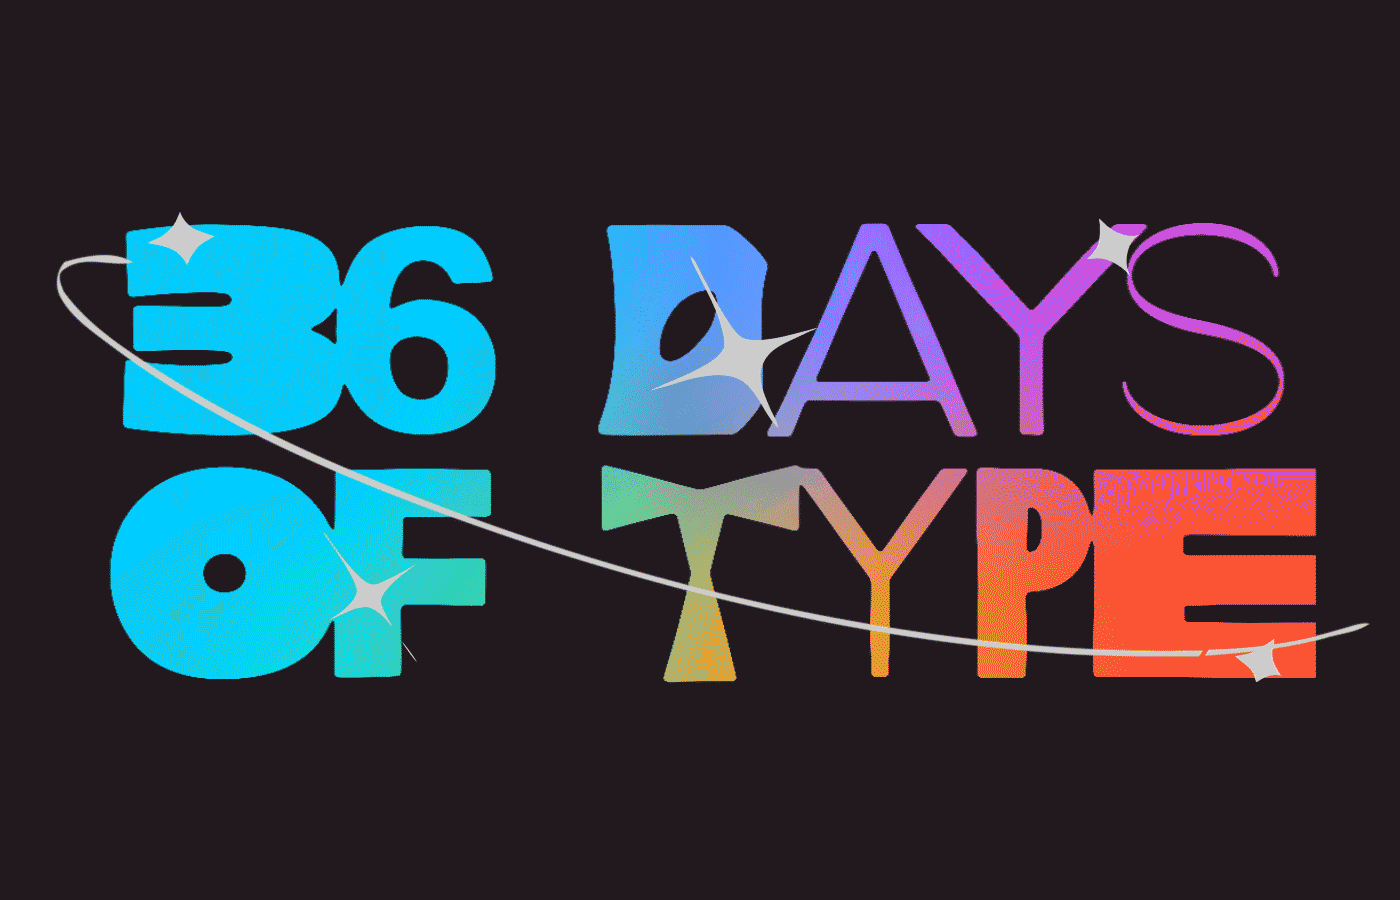 36 days of type animation  font kinetic typography kinetictype lettering motion graphics  type Type Animation Typeface